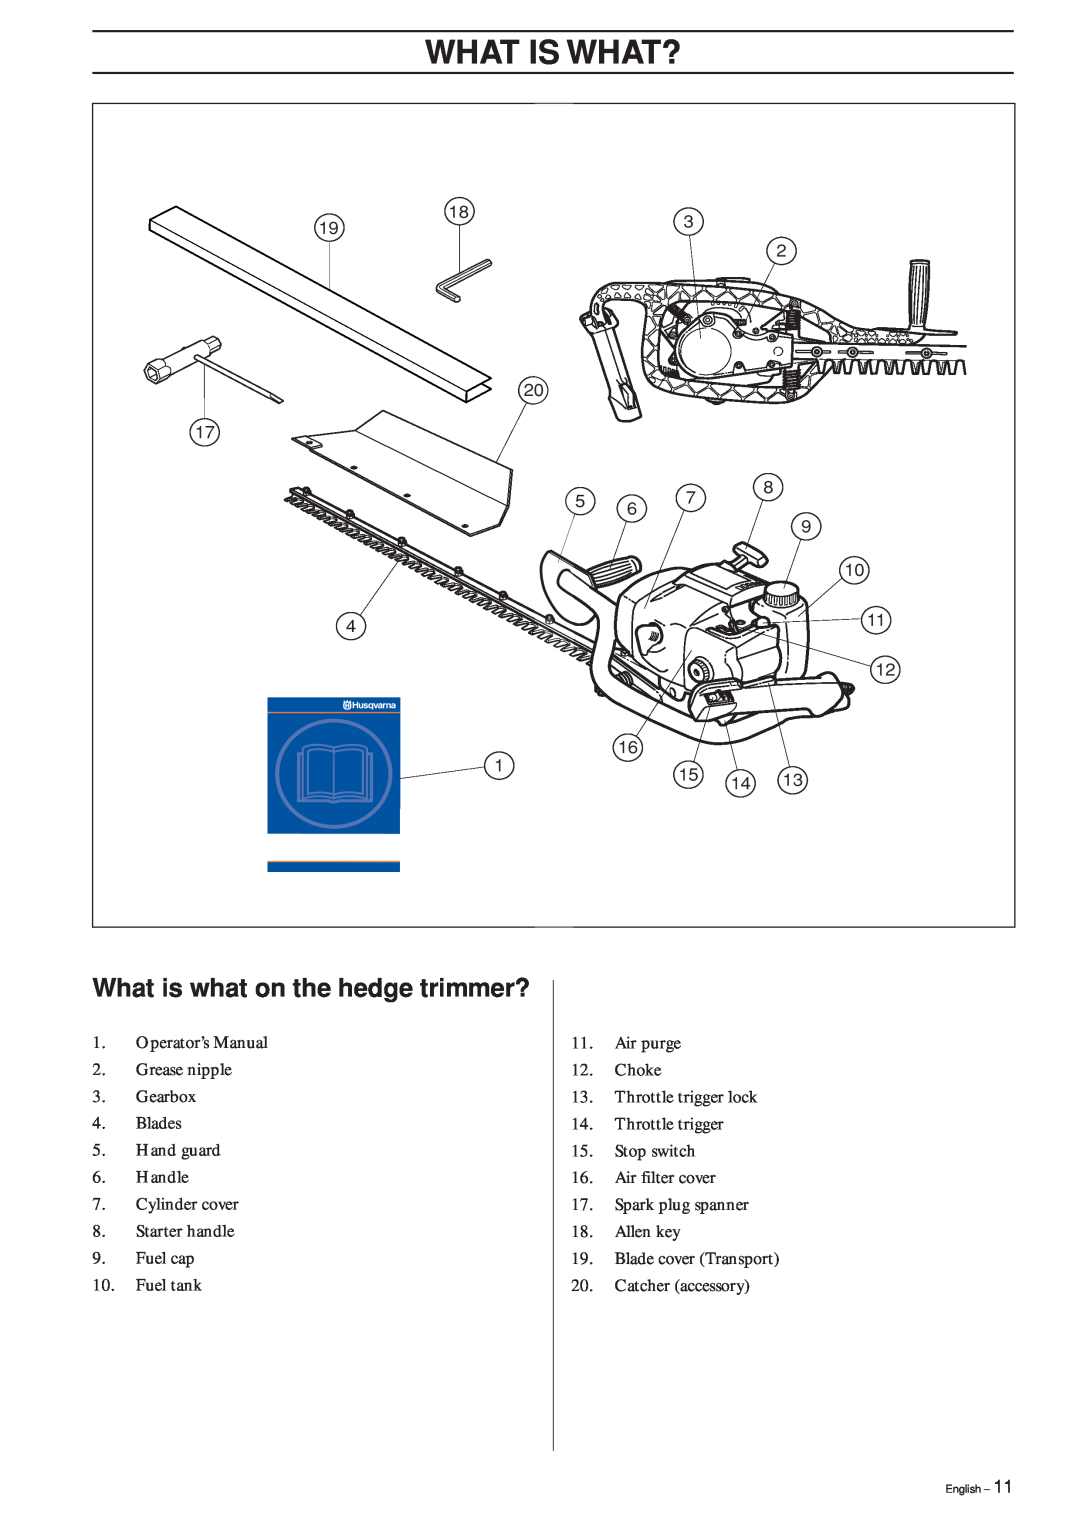 Husqvarna 326HS99, 326HS75 manual What Is What?, What is what on the hedge trimmer? 